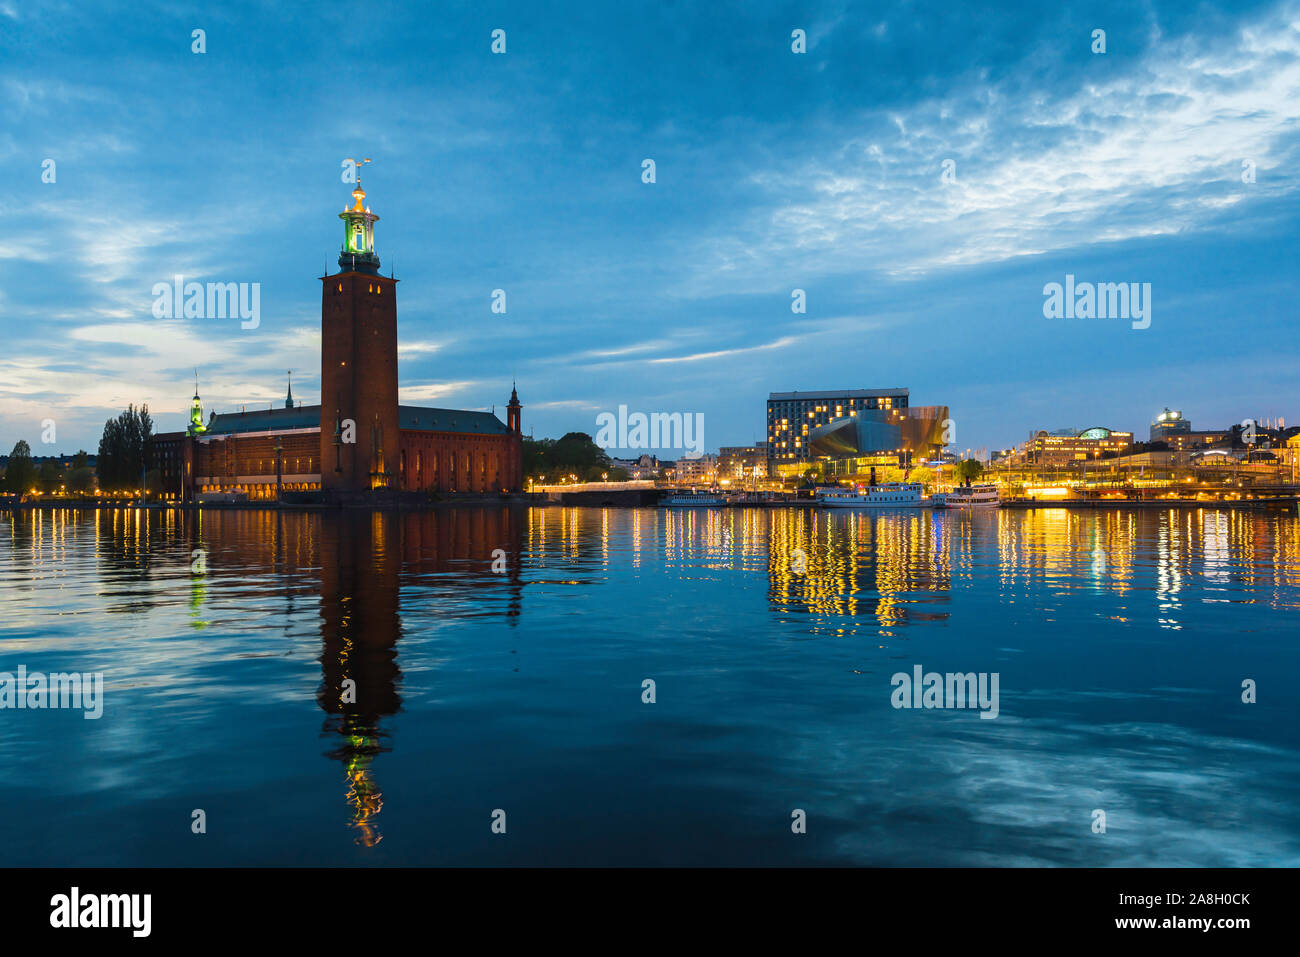 Stockholm skyline, summer night view across the Riddarfjärden towards the Kungsholmen (left) and Norrmalm waterfronts, central Stockholm, Sweden. Stock Photo